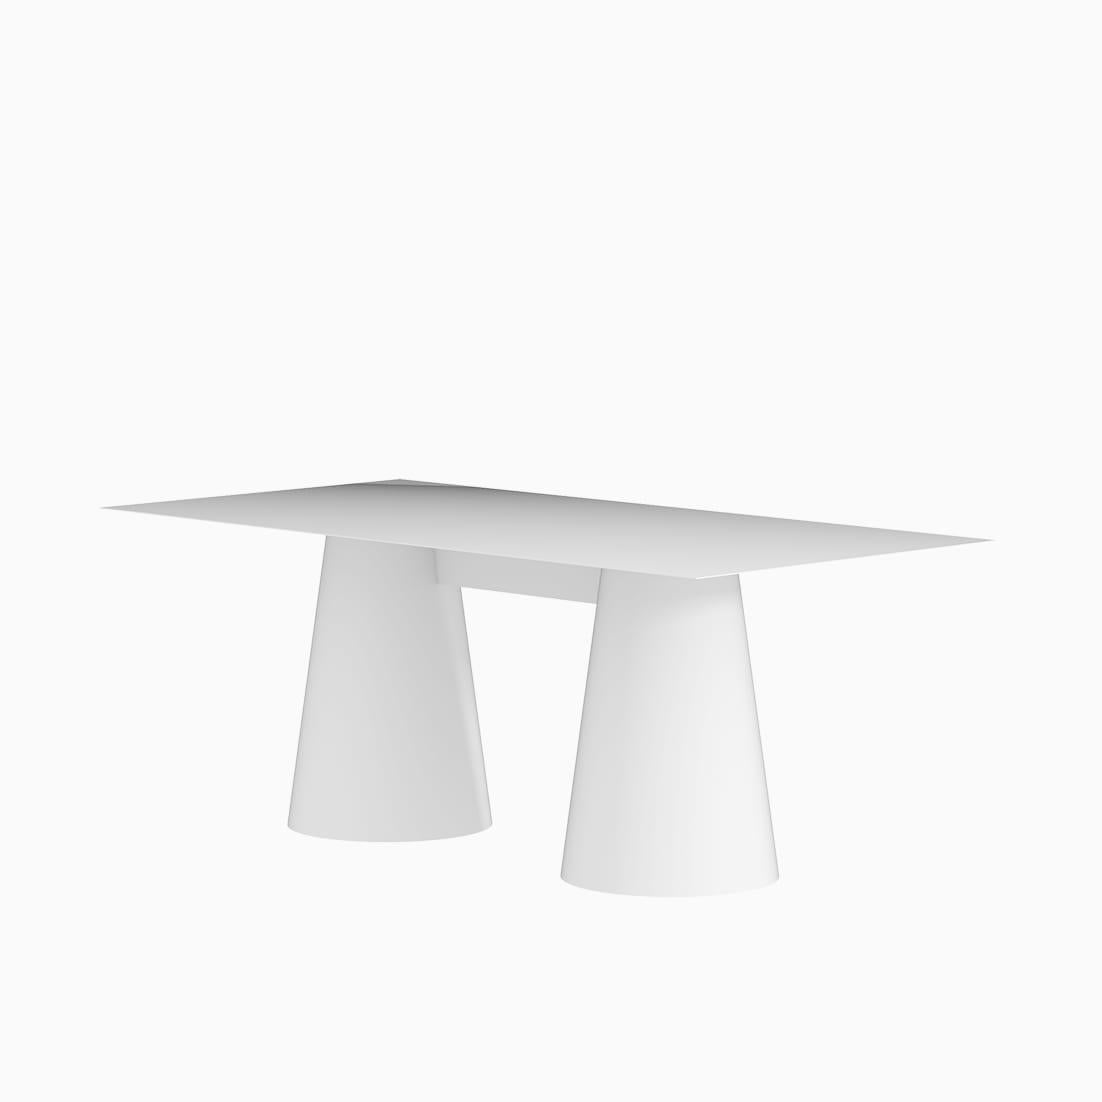 The Conic Dining Table is a monolithic piece conceptualized as a dining table suitable for both, indoor and outdoor. 
Crafted by hand in galvanized aluminum and coated with a matte electrostatic finish it's size can be customized.
The Tripod Dining